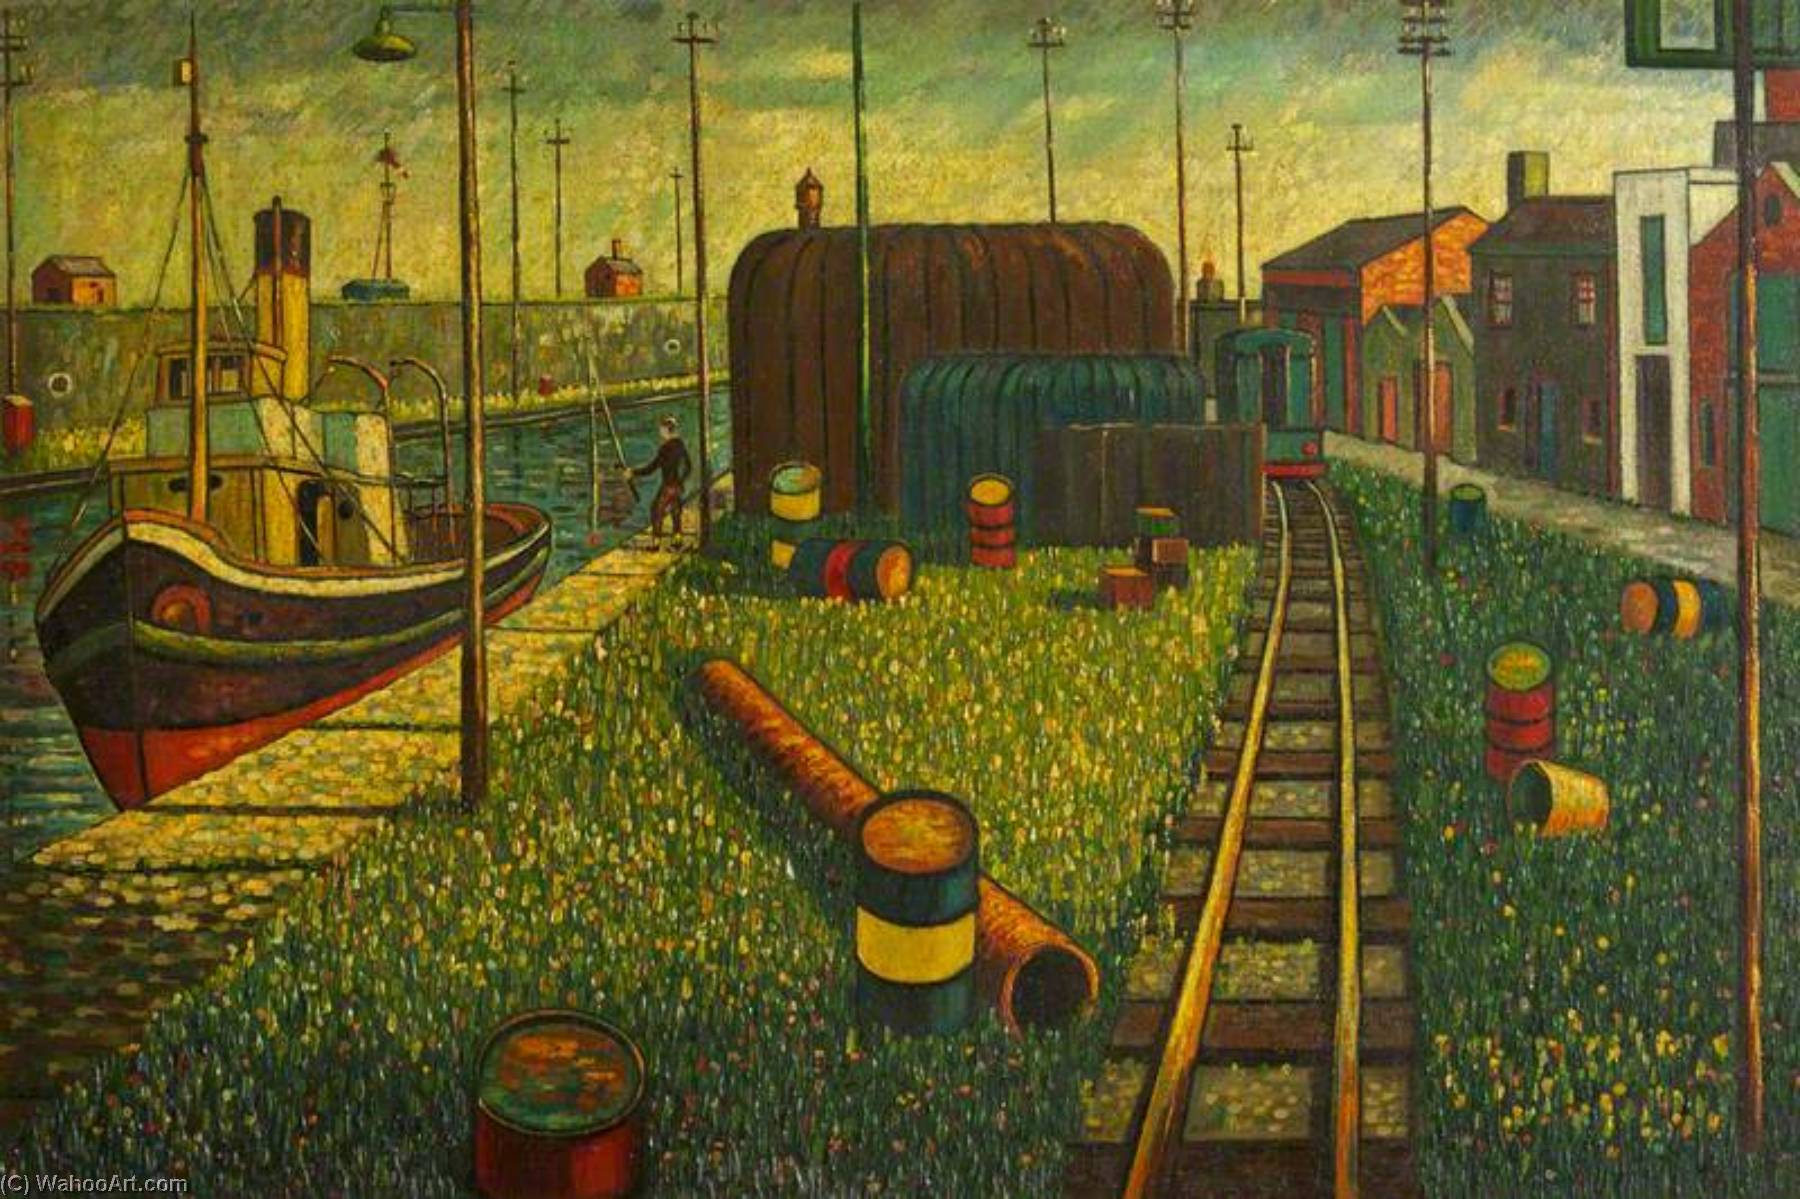 Figure Fishing by a Quayside with a Moored Tug close by and Barrels near a Railway Line by Charles Byrd (1916-2018) Charles Byrd | ArtsDot.com